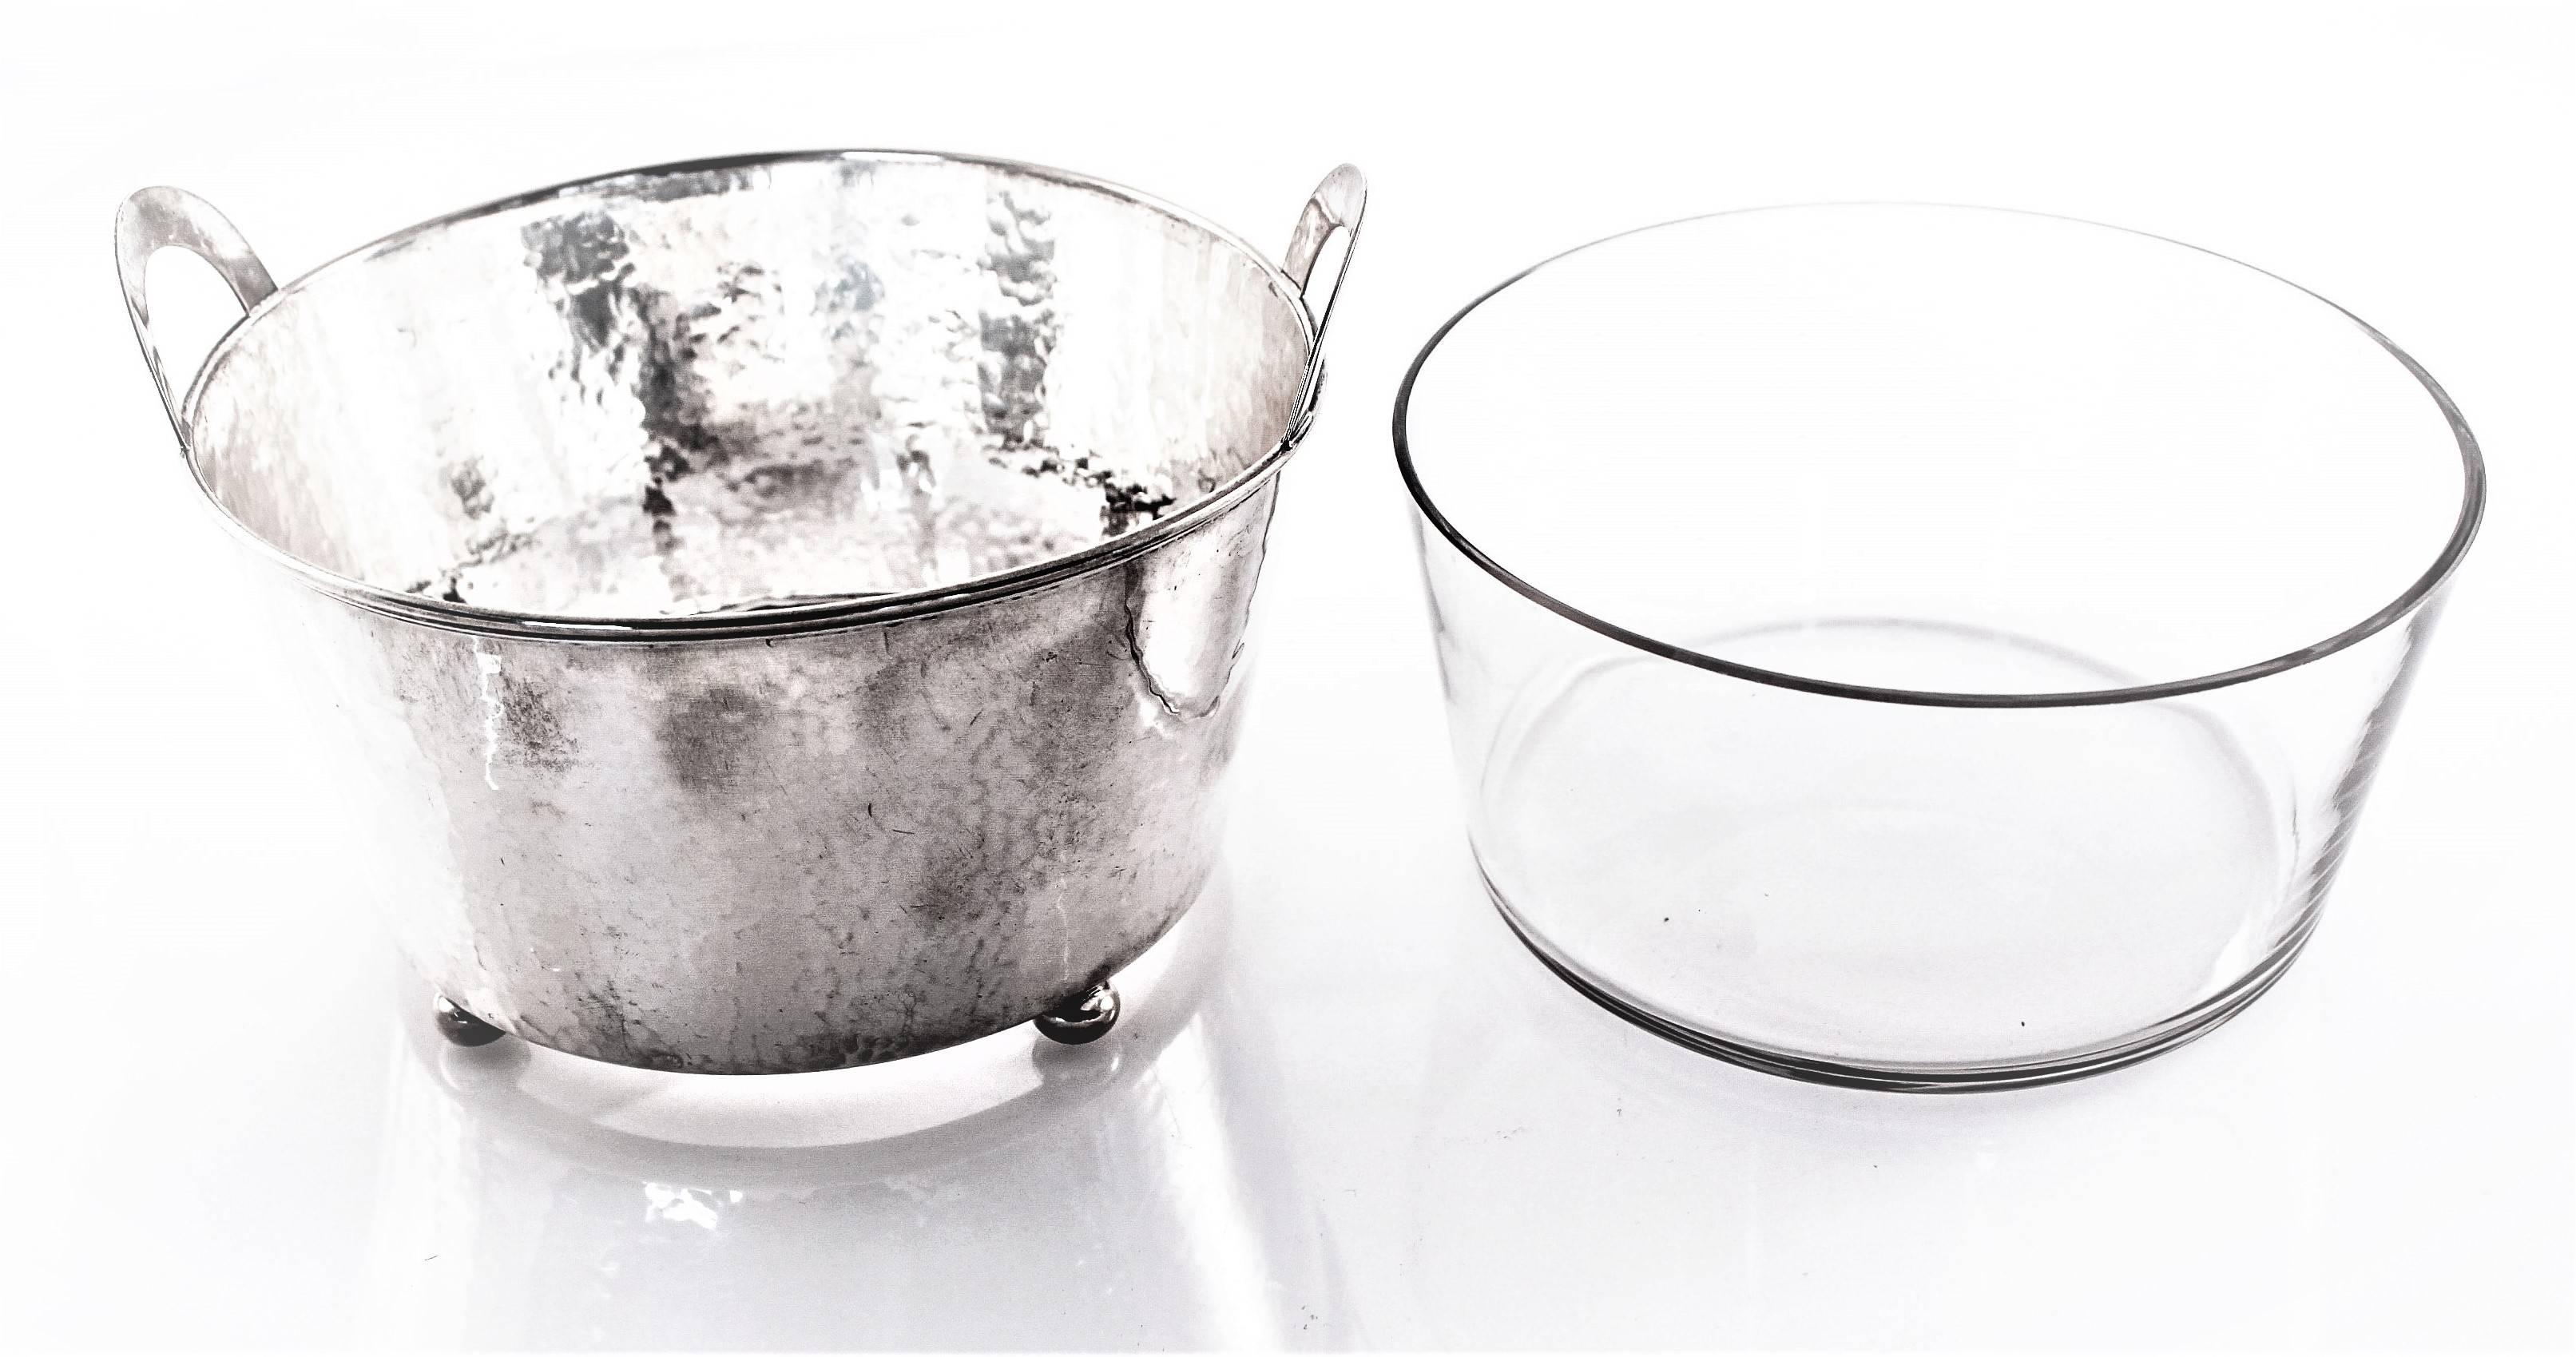 What a lovely way to serve ice on a dinner table. This hand-hammered ice bucket comes with the original glass liner. The glass is removable making it a pleasure to clean. This piece can also be used for anything else you normally wouldn’t put in